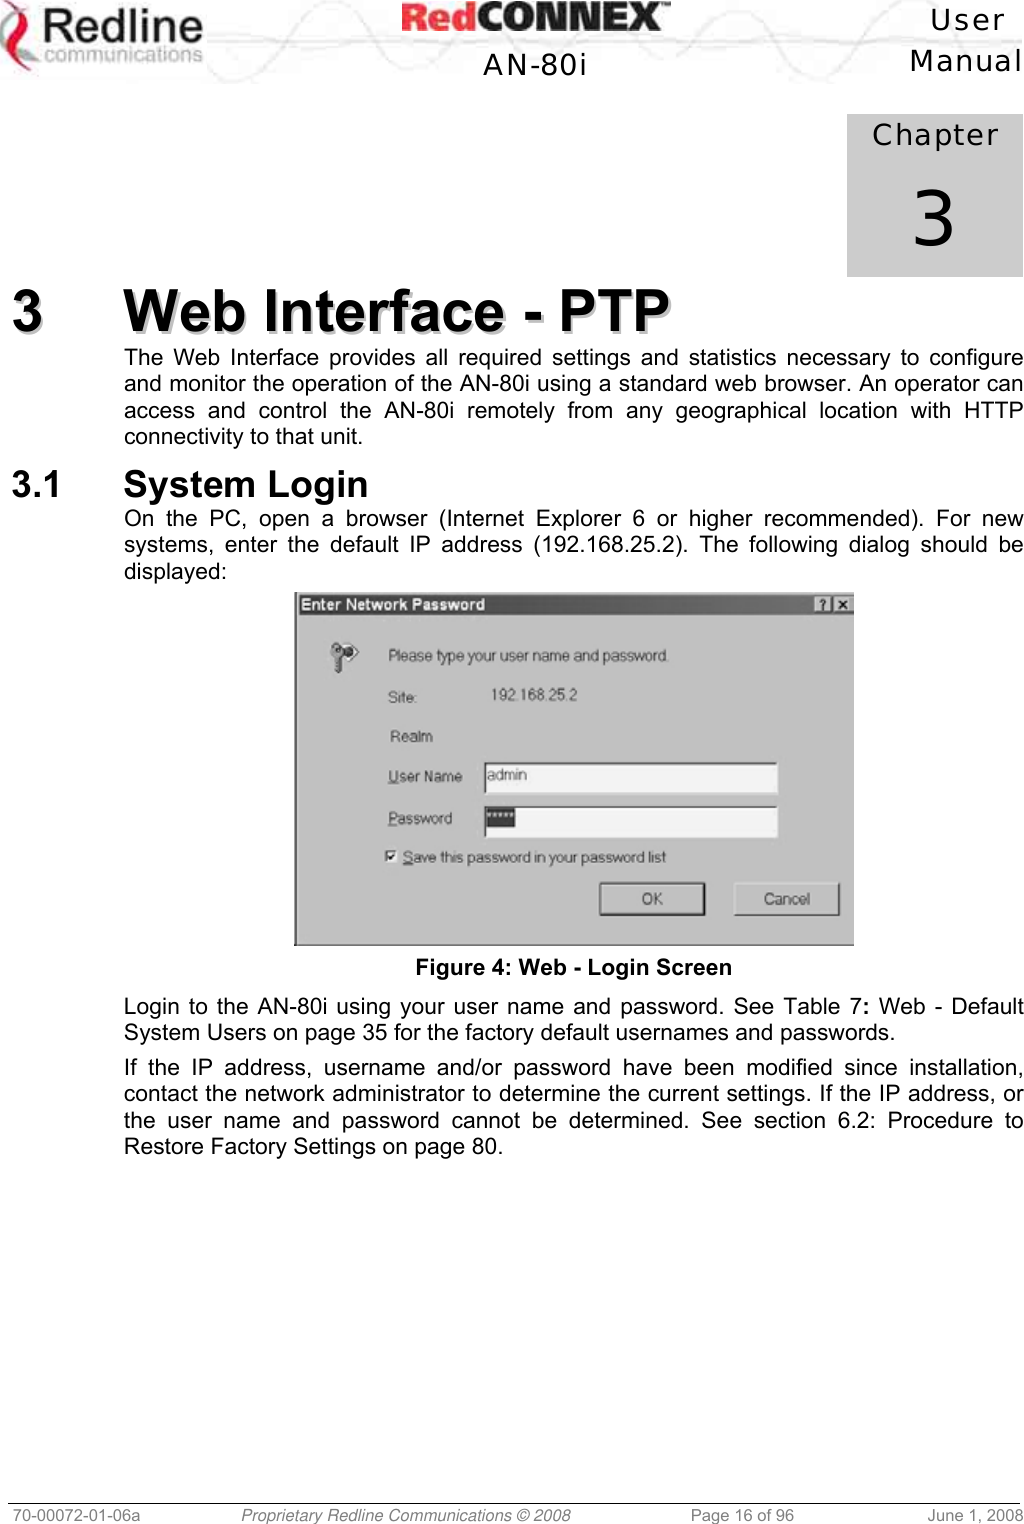   User  AN-80i Manual  70-00072-01-06a  Proprietary Redline Communications © 2008  Page 16 of 96  June 1, 2008            Chapter 3 33  WWeebb  IInntteerrffaaccee  --  PPTTPP  The Web Interface provides all required settings and statistics necessary to configure and monitor the operation of the AN-80i using a standard web browser. An operator can access and control the AN-80i remotely from any geographical location with HTTP connectivity to that unit. 3.1 System Login On the PC, open a browser (Internet Explorer 6 or higher recommended). For new systems, enter the default IP address (192.168.25.2). The following dialog should be displayed:  Figure 4: Web - Login Screen Login to the AN-80i using your user name and password. See Table 7: Web - Default System Users on page 35 for the factory default usernames and passwords. If the IP address, username and/or password have been modified since installation, contact the network administrator to determine the current settings. If the IP address, or the user name and password cannot be determined. See section 6.2: Procedure to Restore Factory Settings on page 80. 